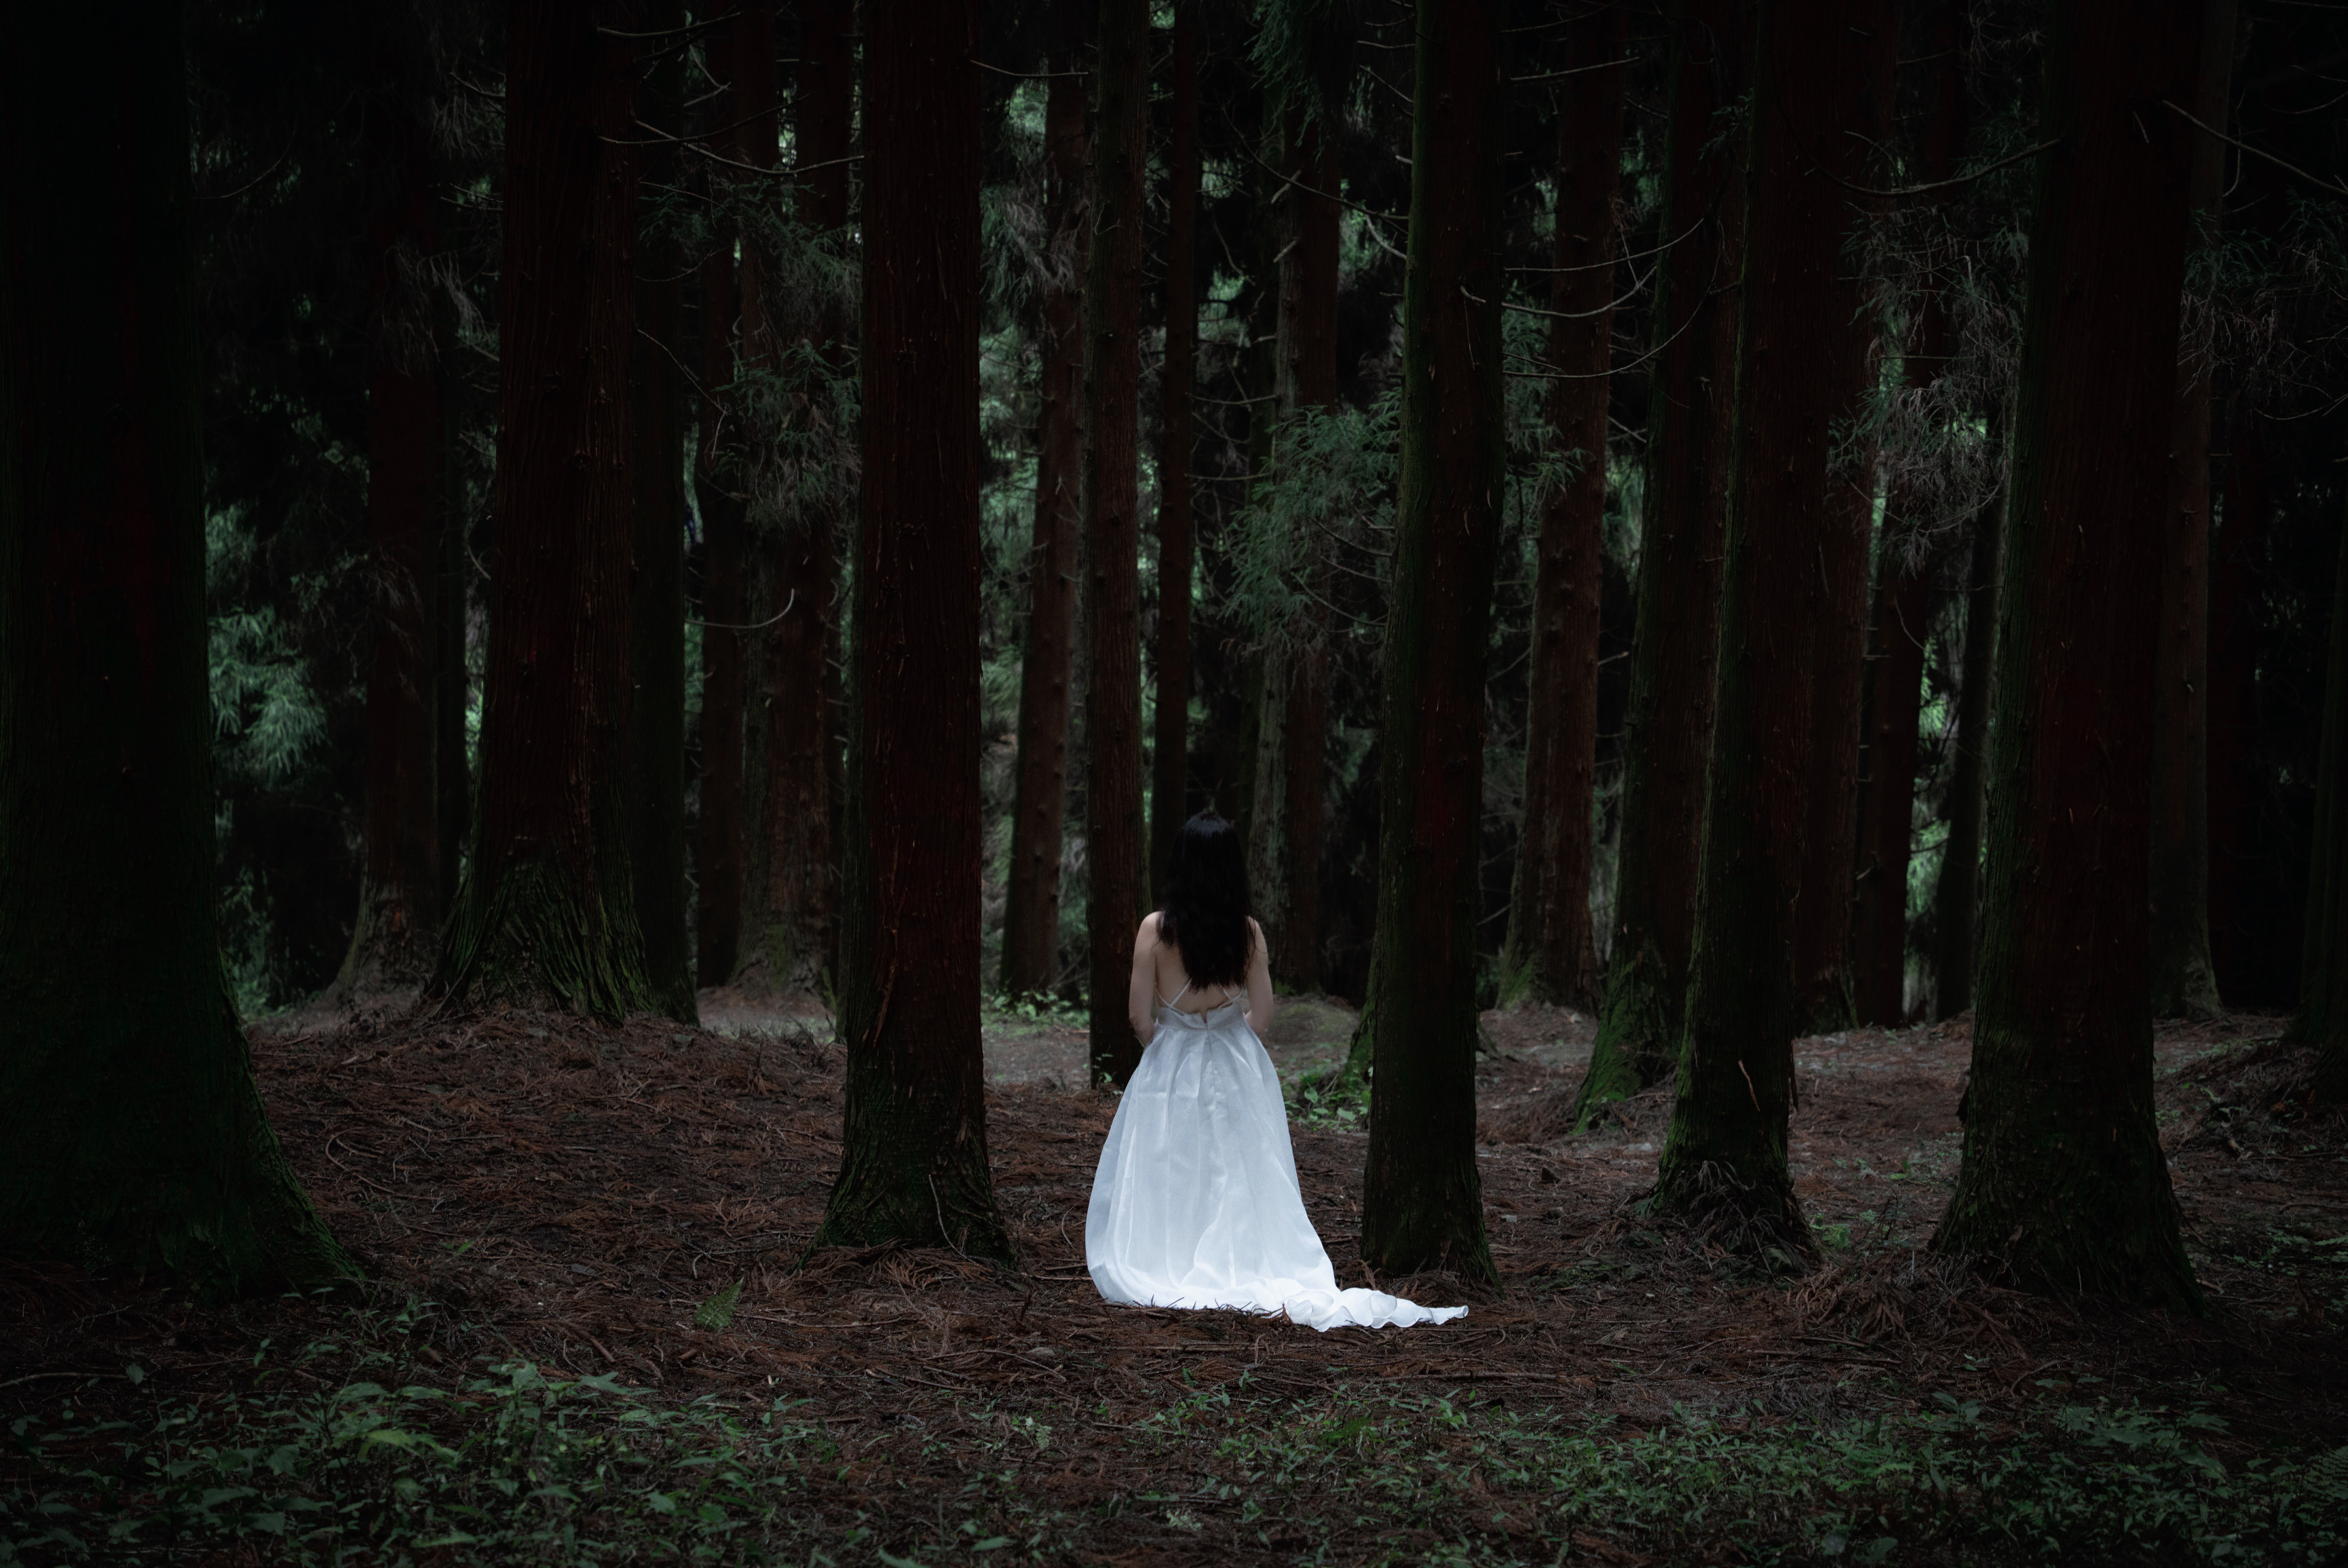 People 3460x2311 forest women Asian white dress trees